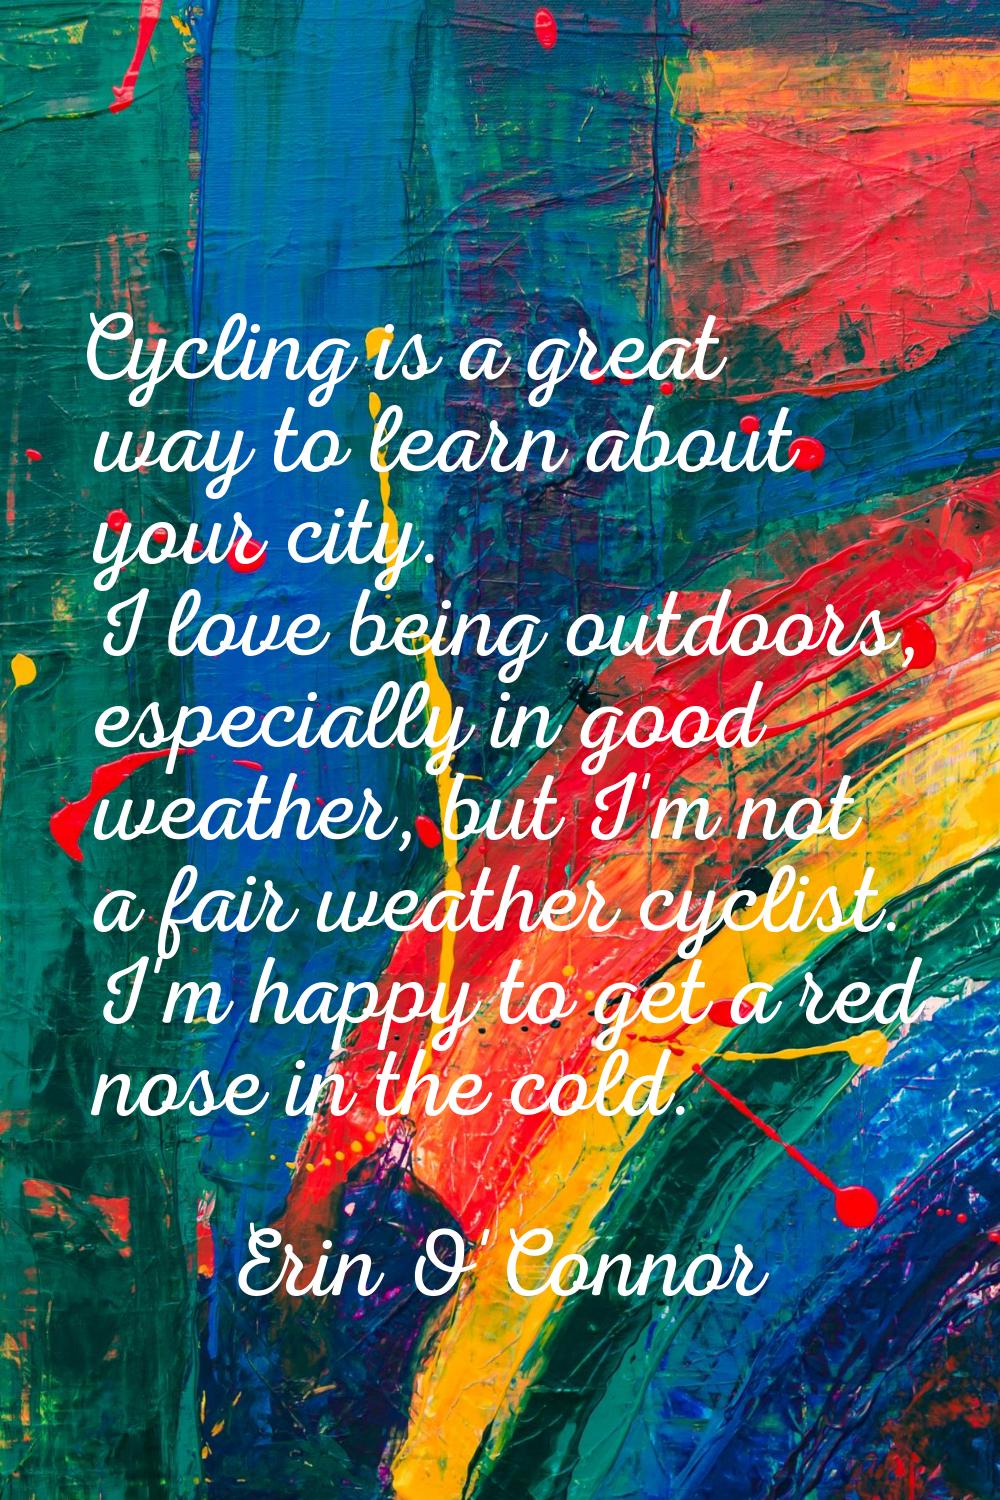 Cycling is a great way to learn about your city. I love being outdoors, especially in good weather,